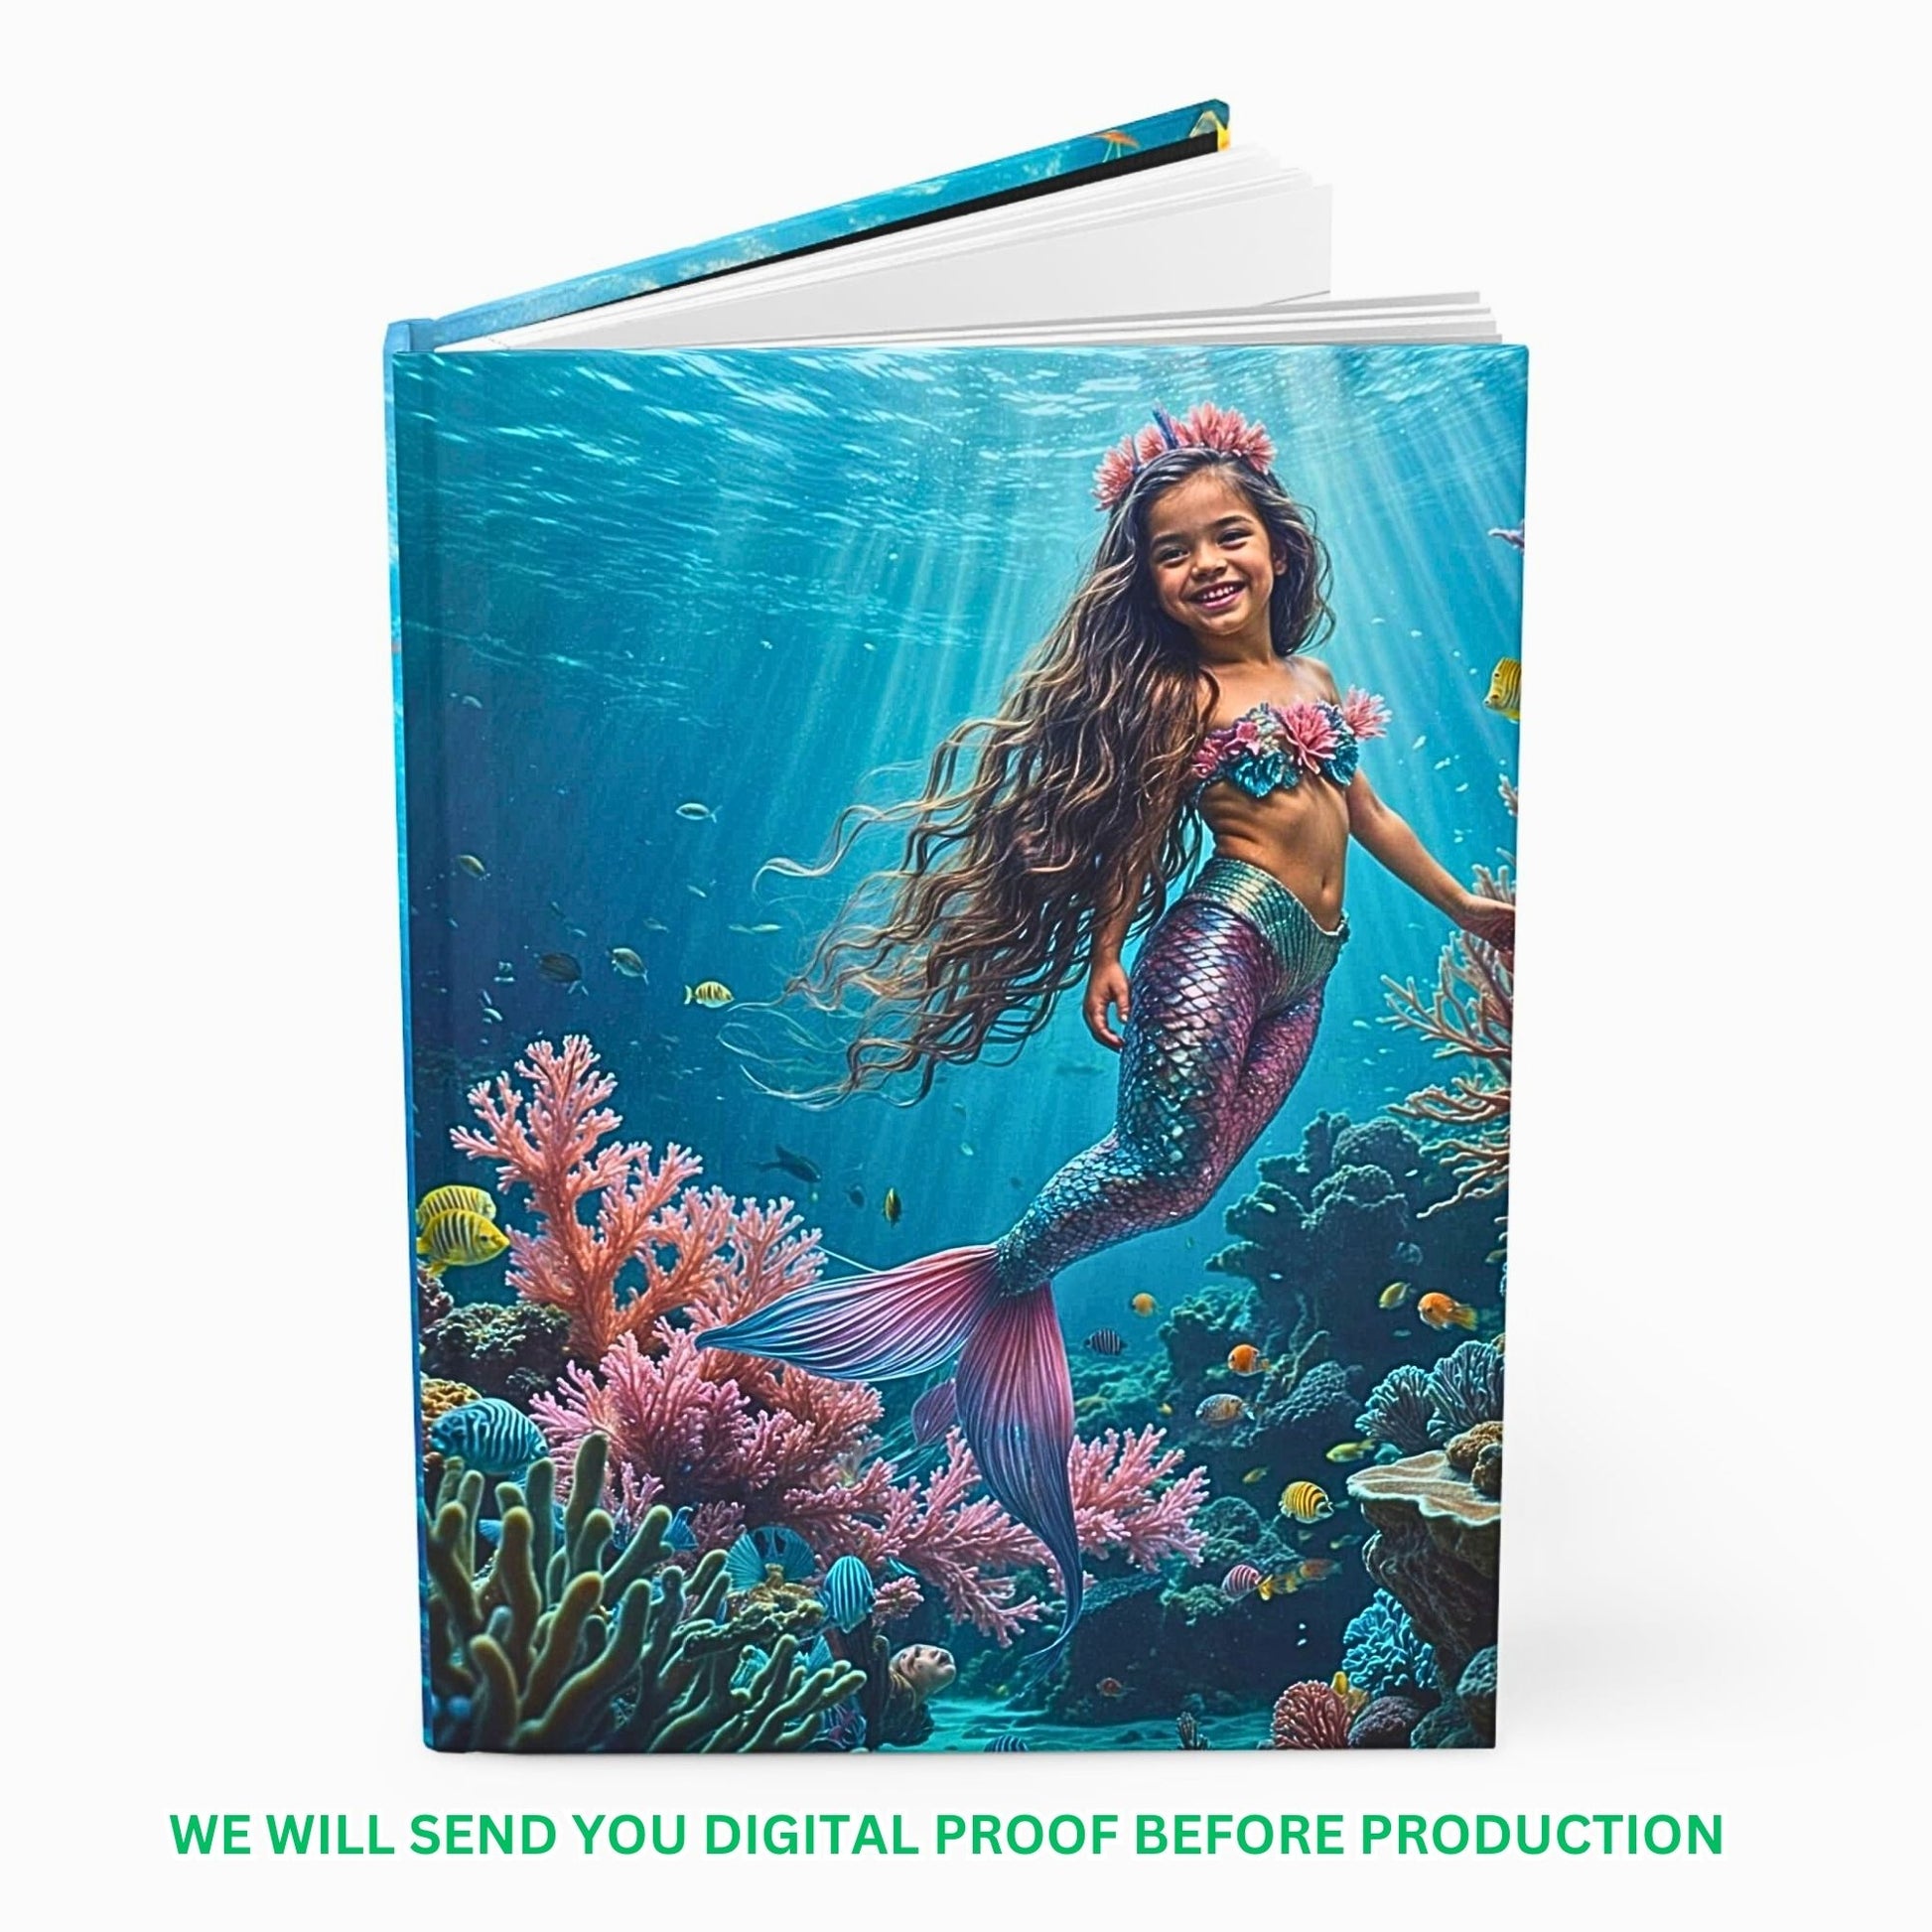 Embark on an enchanting journey with our Custom Mermaid Journal, designed from your treasured photo. Tailor-made for birthdays, this personalized gift inspires girls to capture their dreams and adventures in style.